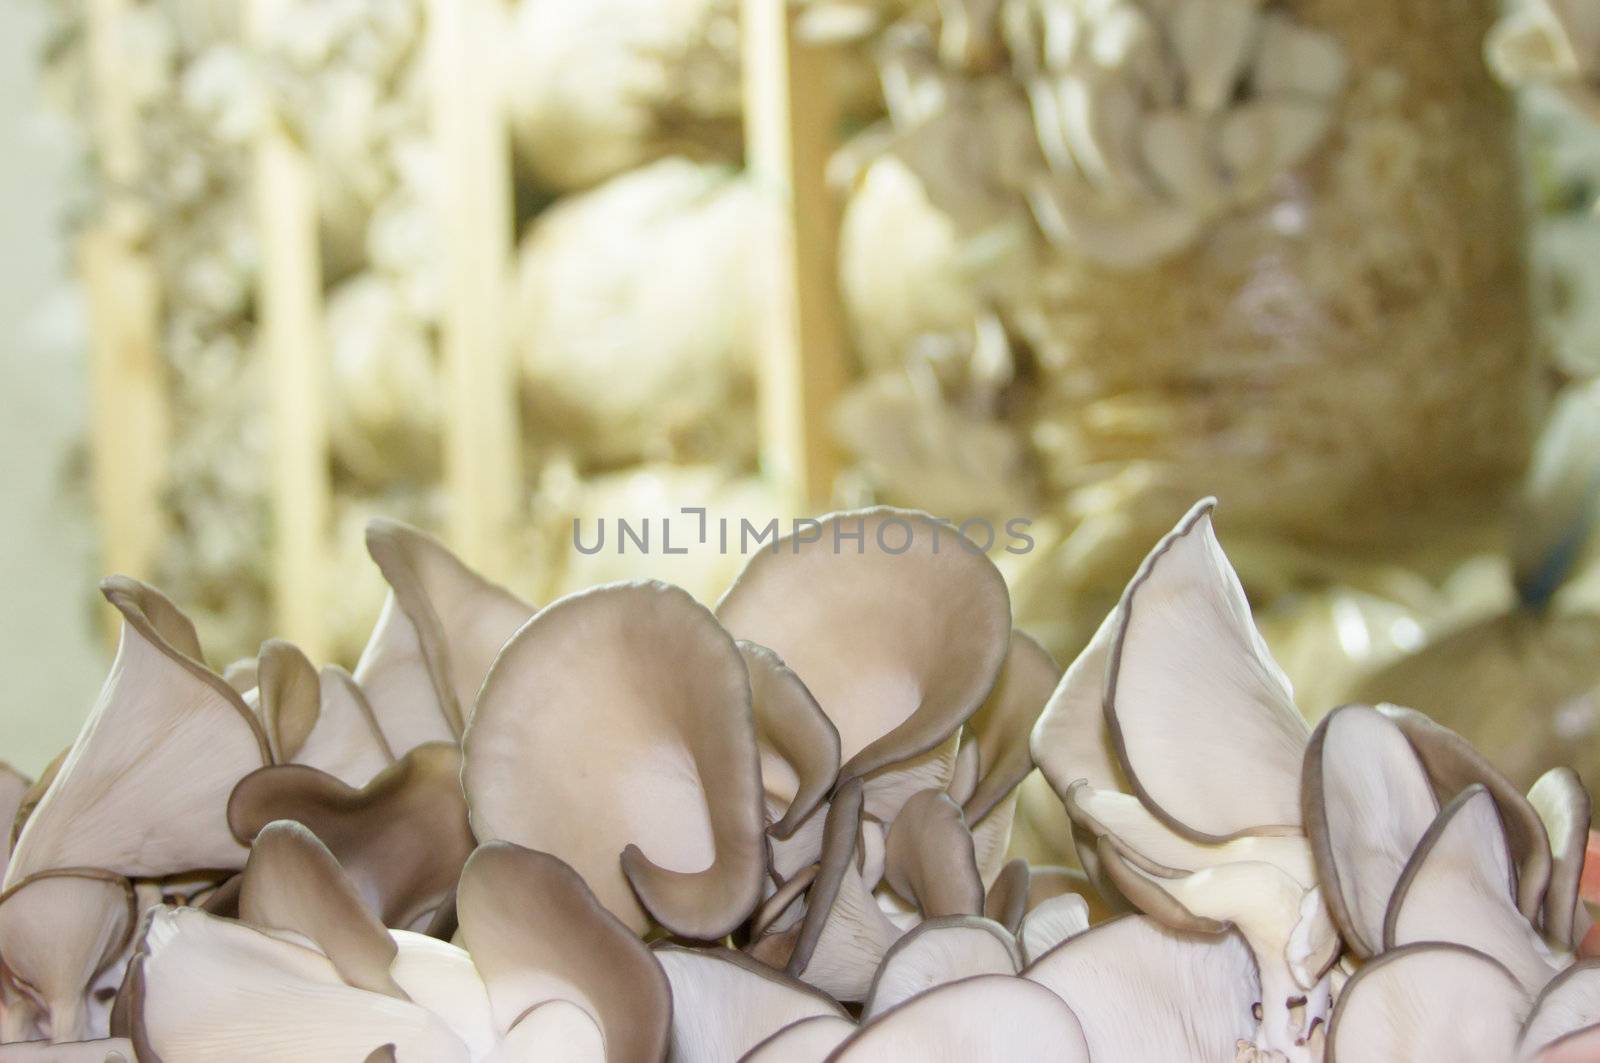 Oyster mushrooms cultivation on the plastic bag with mycelium